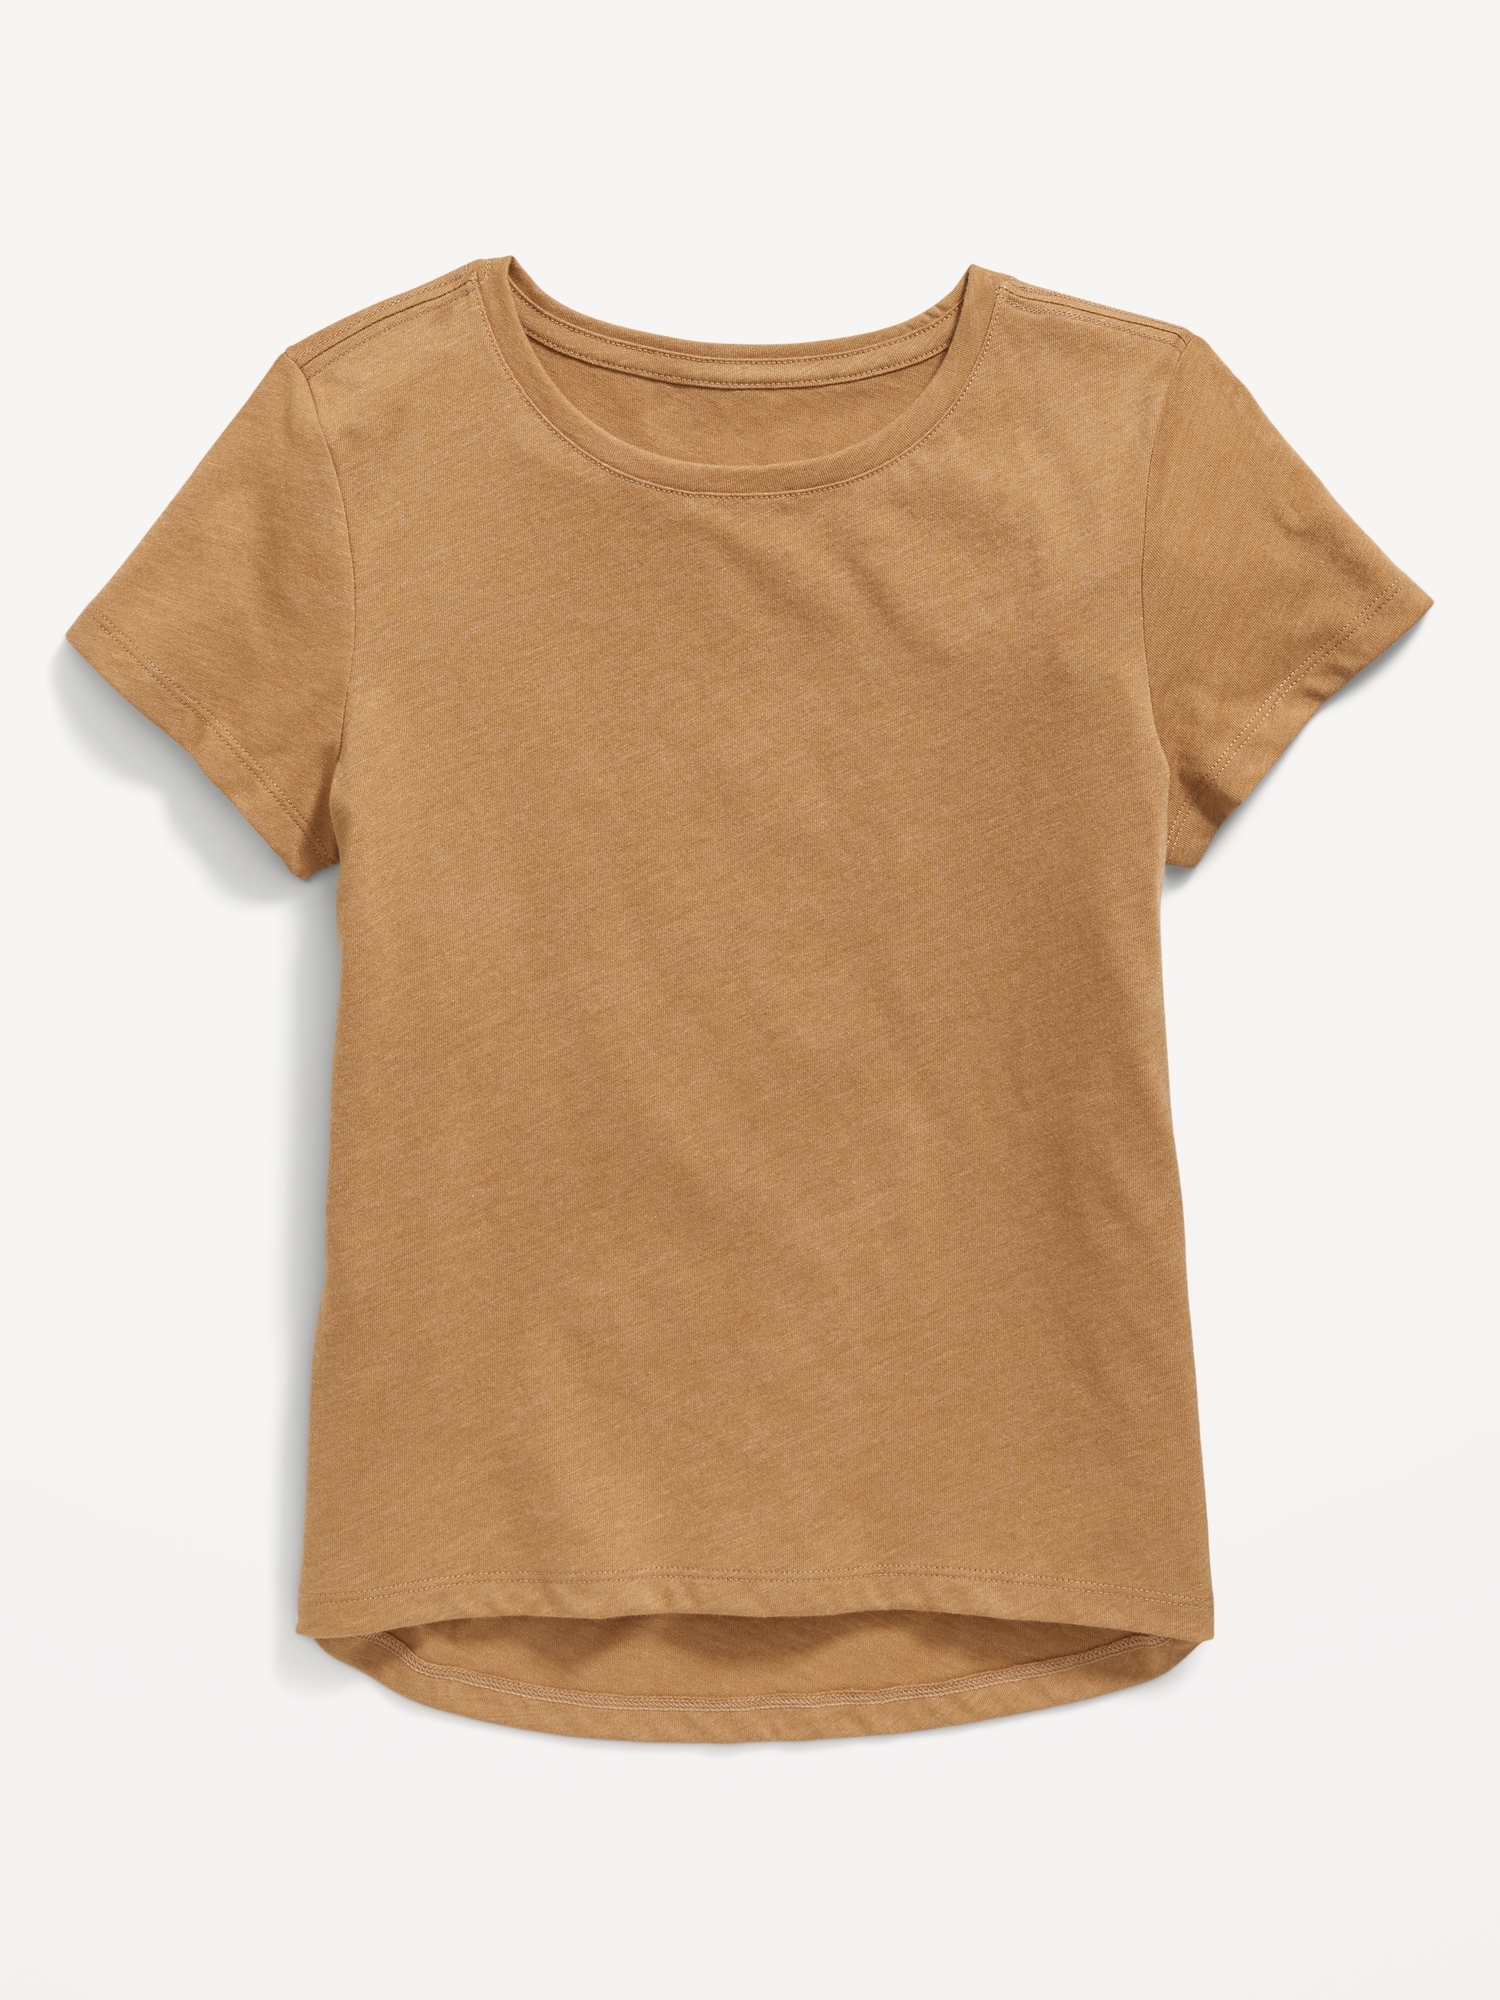 Old Navy Softest Solid T-Shirt for Girls yellow. 1